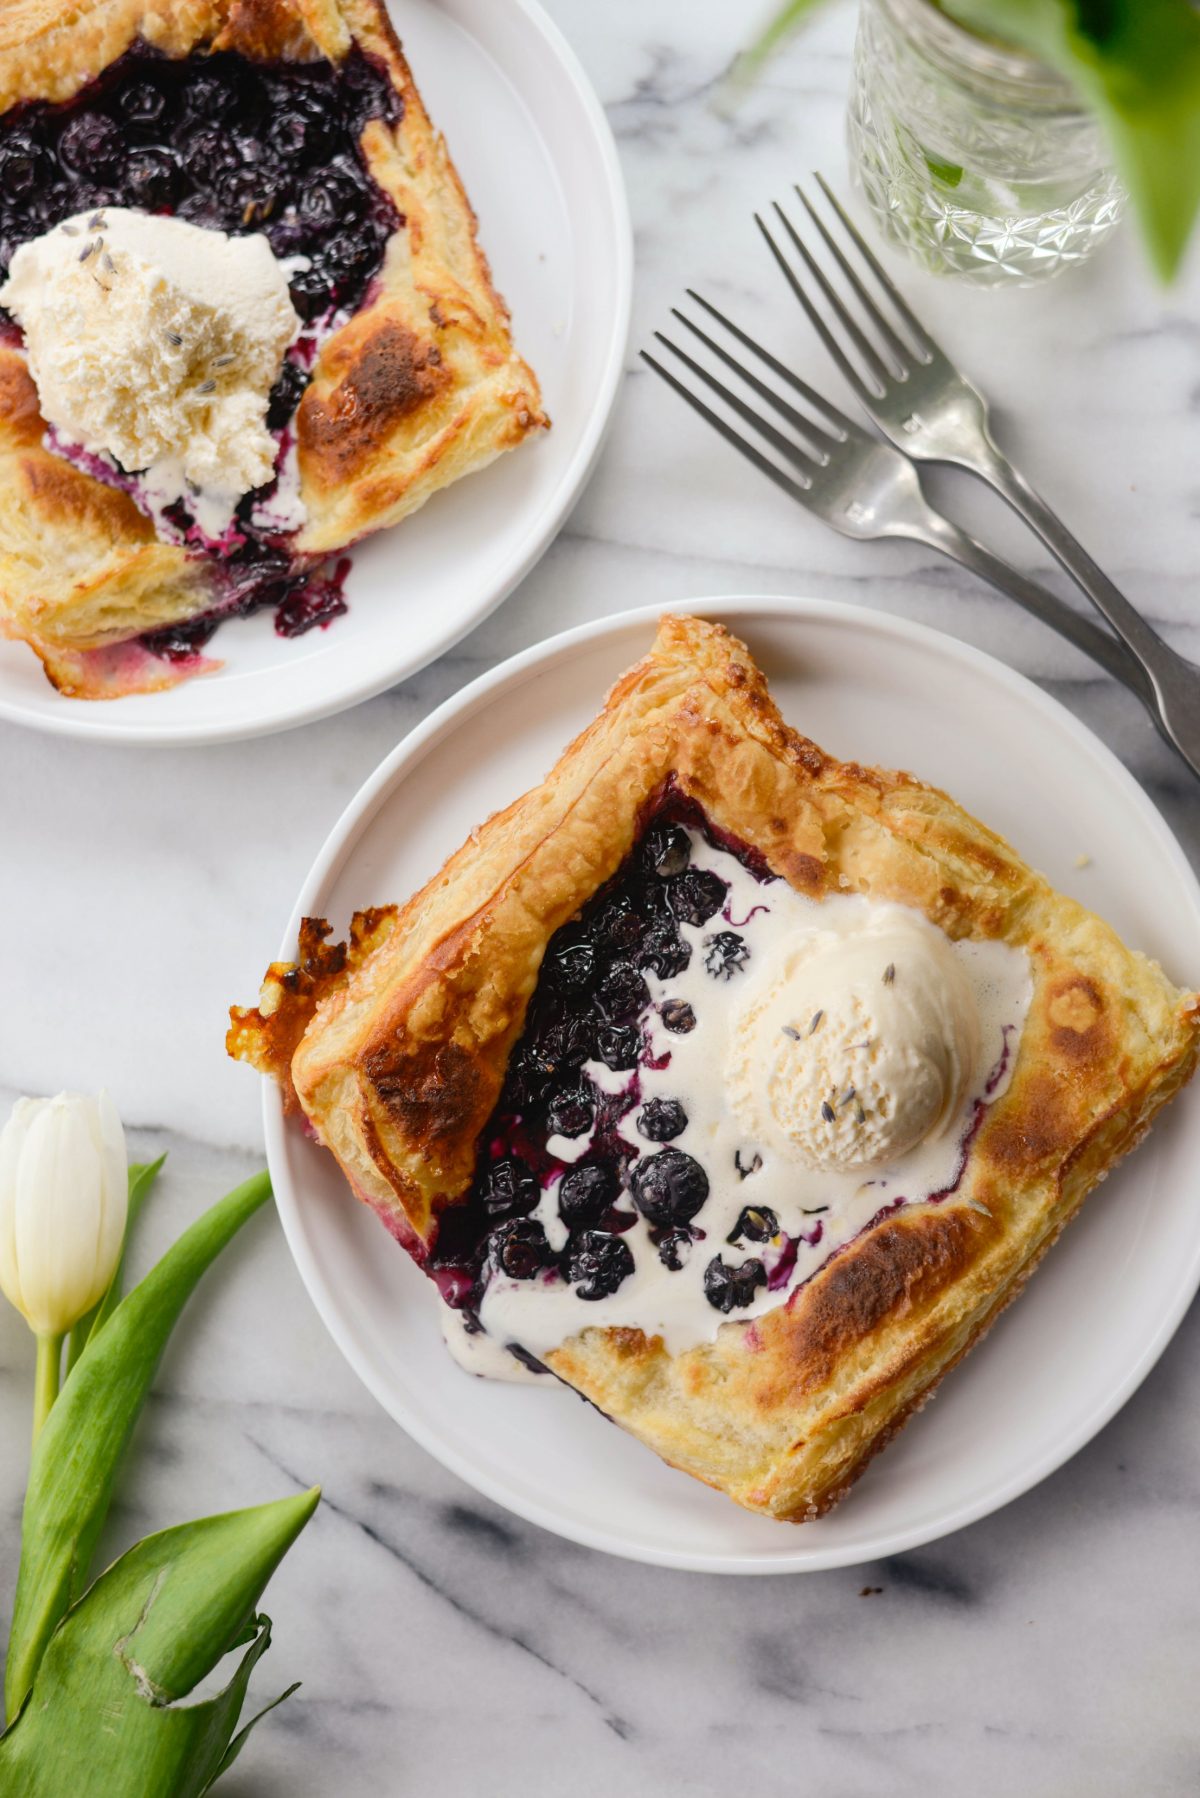 Blueberry Lavender Pastry Pies l SimplyScratch.com #blueberry #lavender #puffpastry #pies #dessert